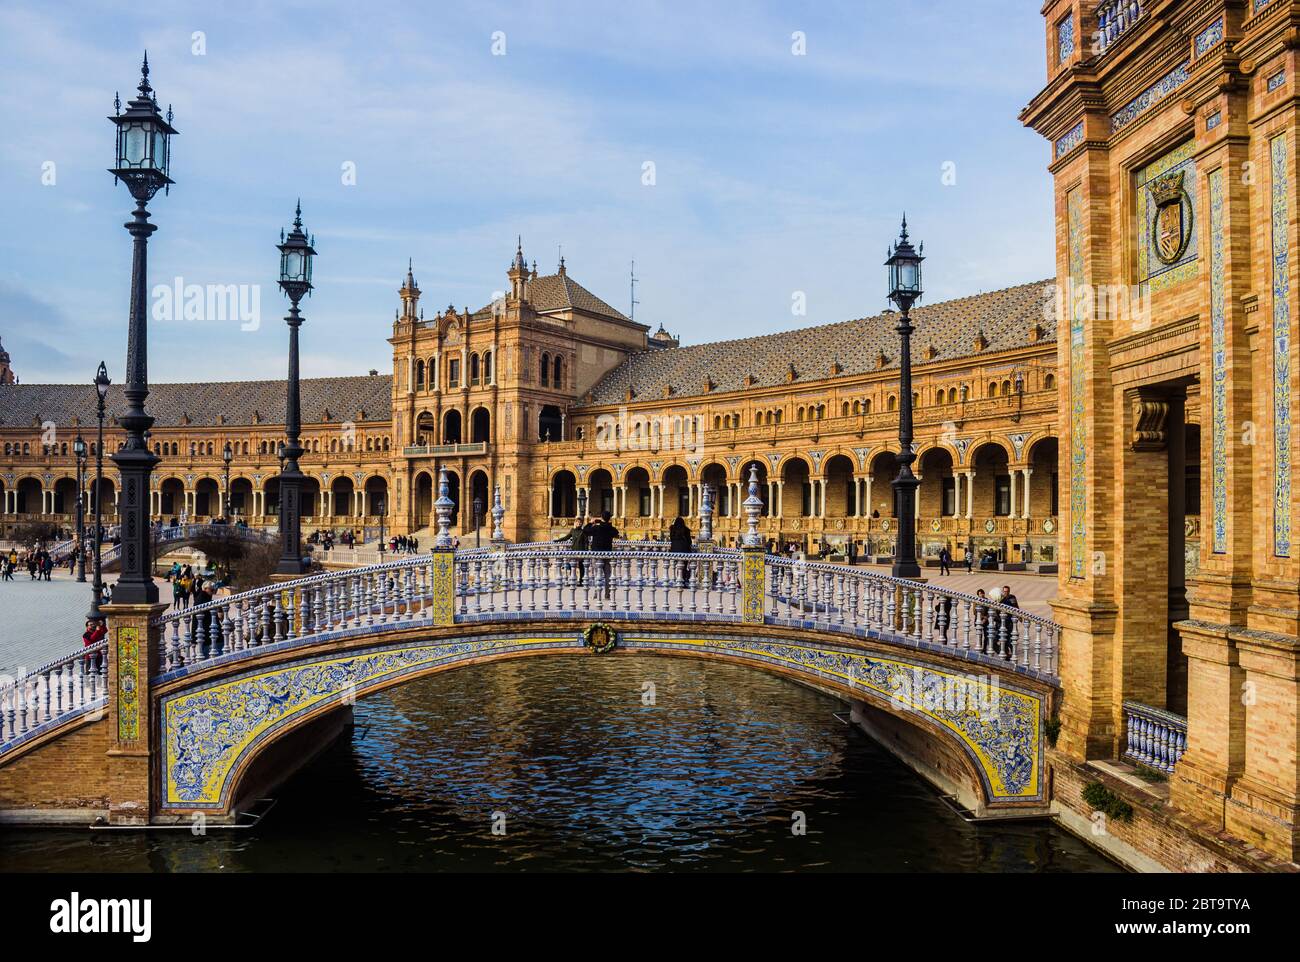 Spain Square - Seville, Andalusia - Spain Stock Photo